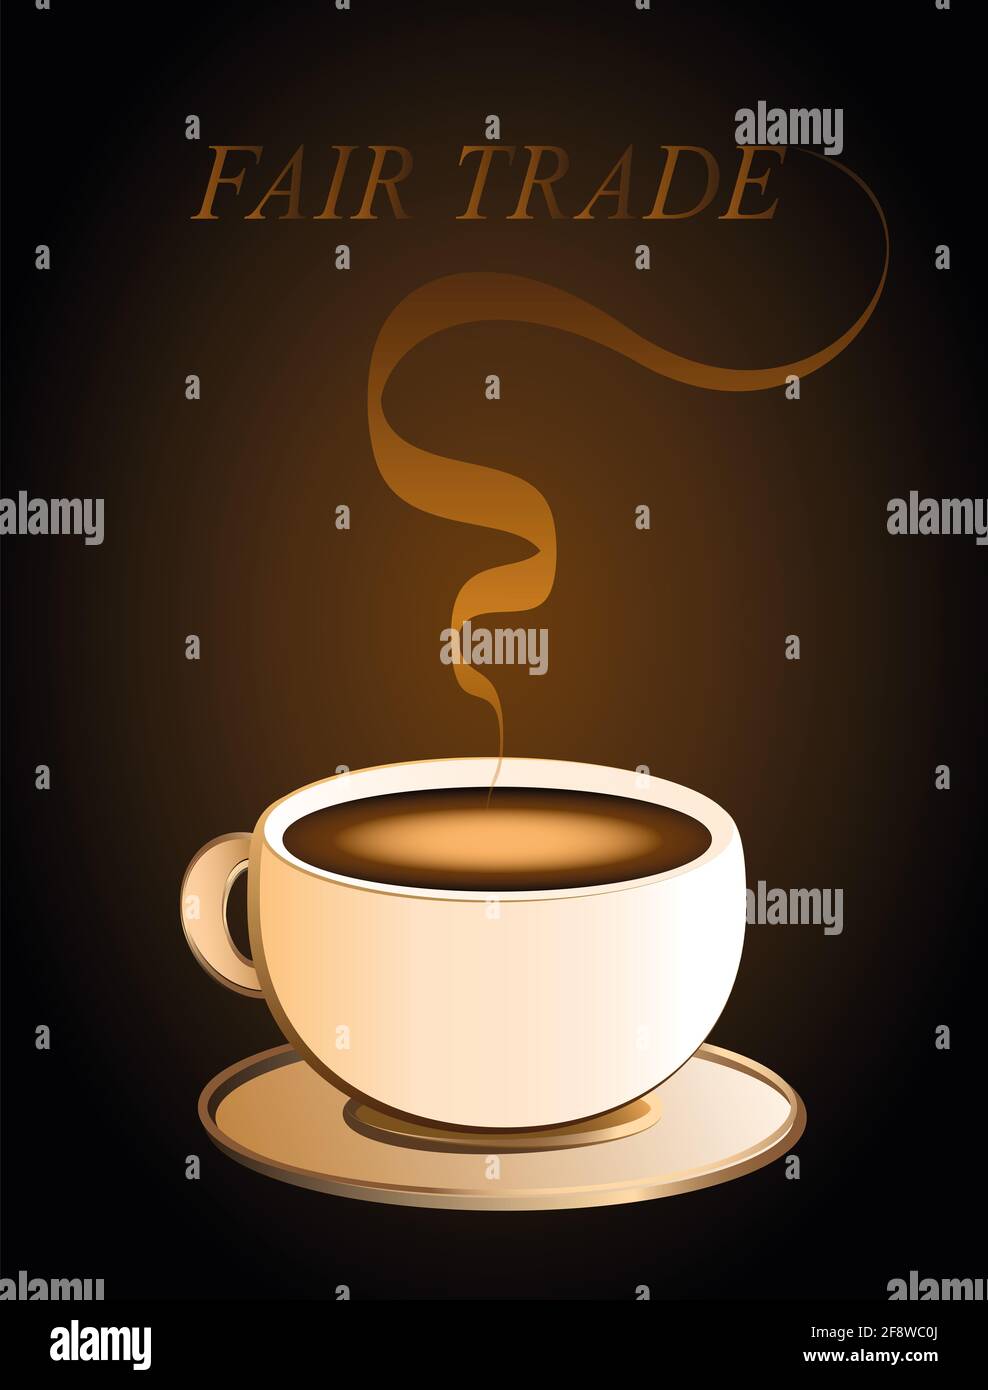 Fairtrade coffee with aroma and FAIR TRADE text - illustration on brown background. Stock Photo